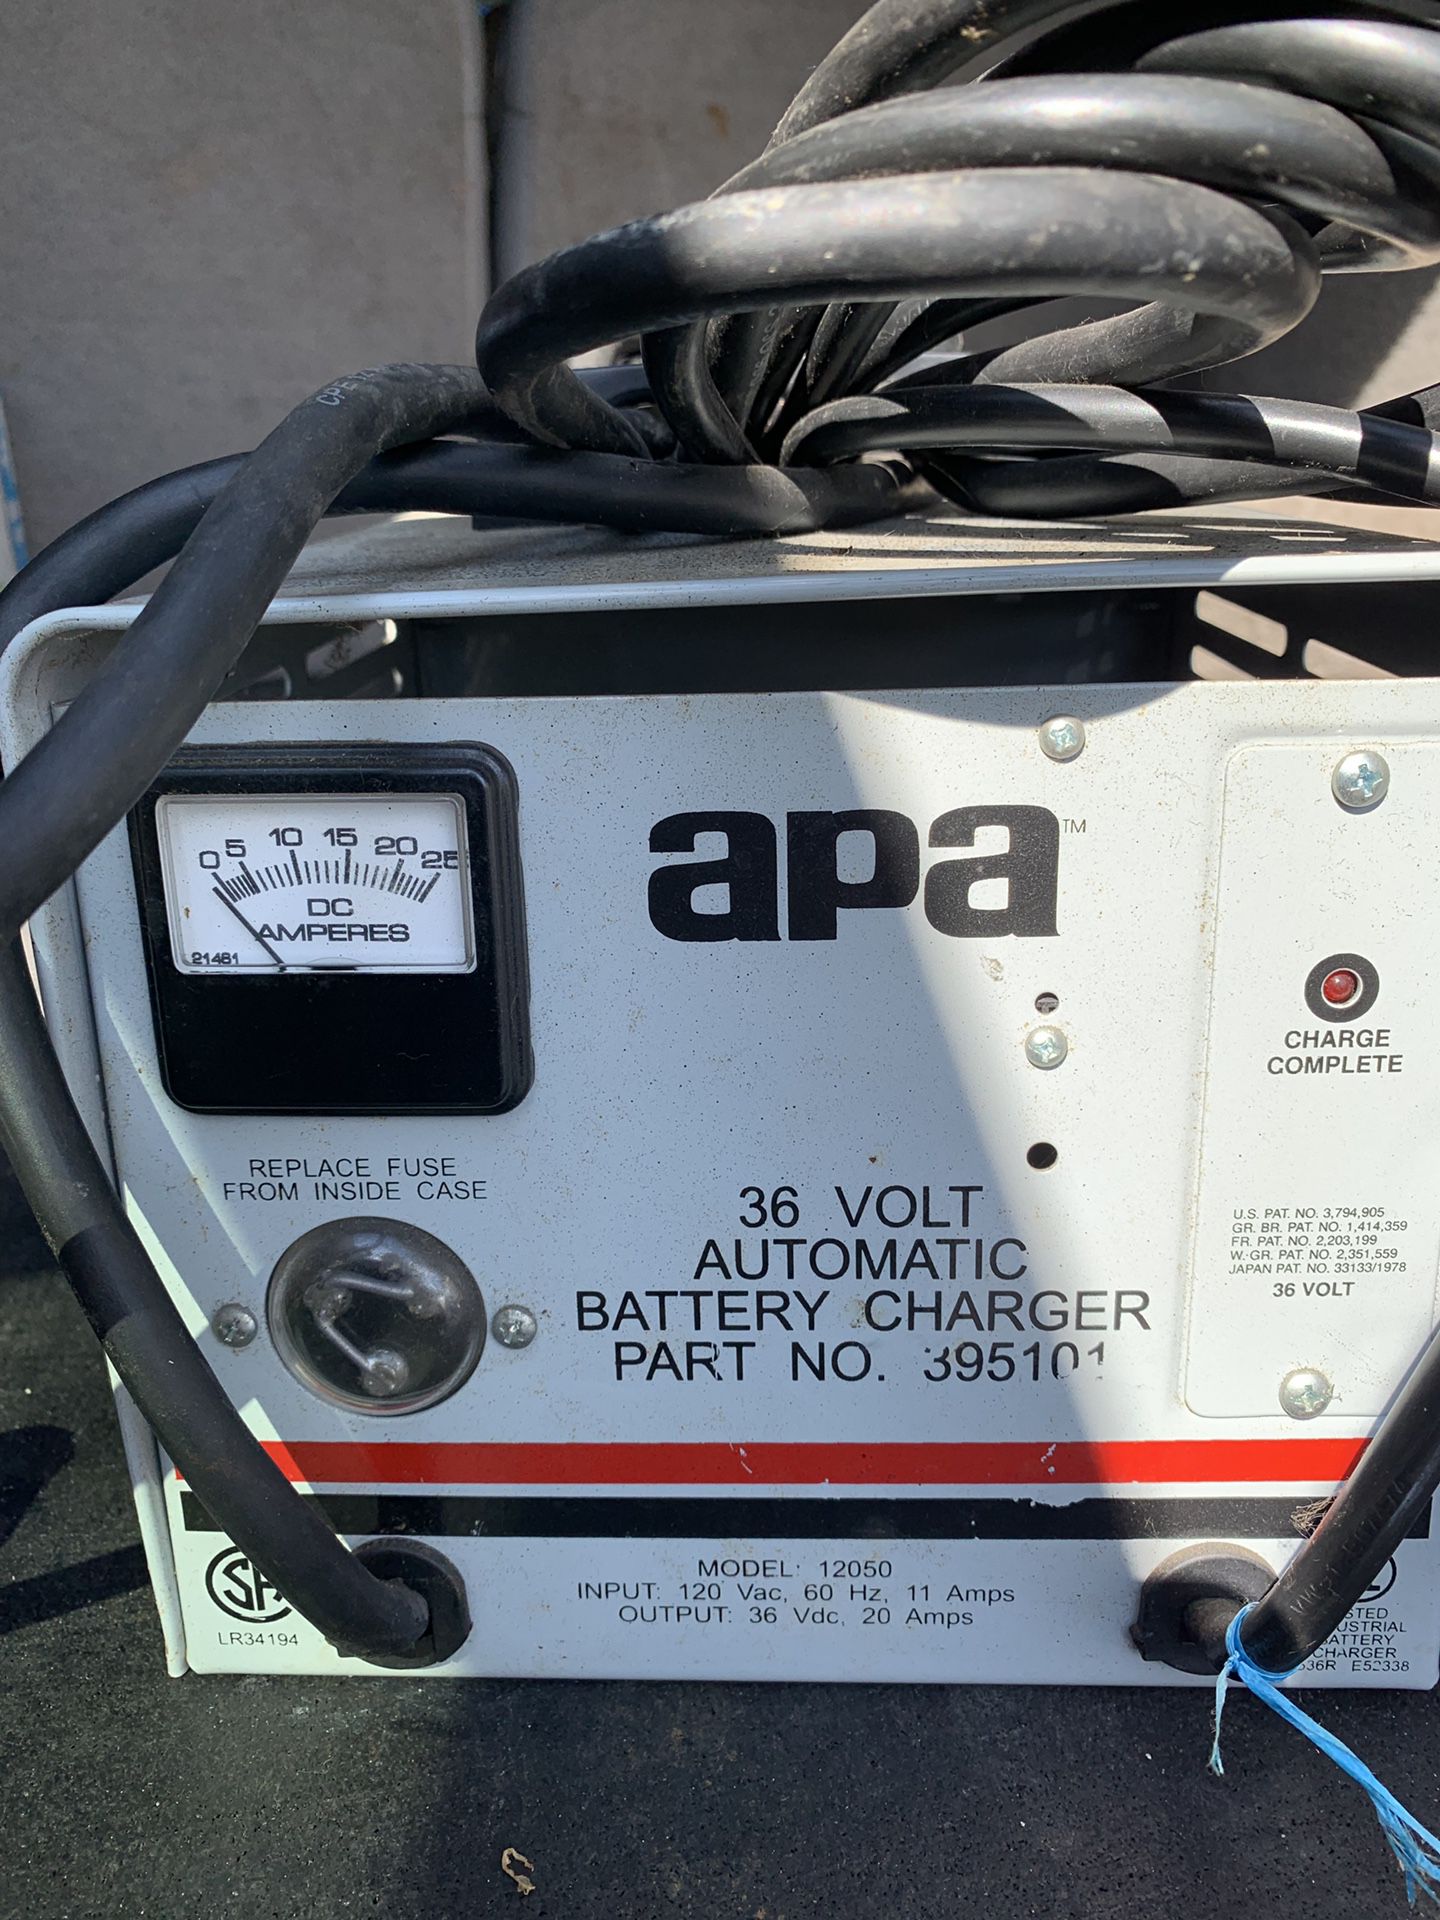 APA 36volt/20amp automatic battery charger floor scrubber